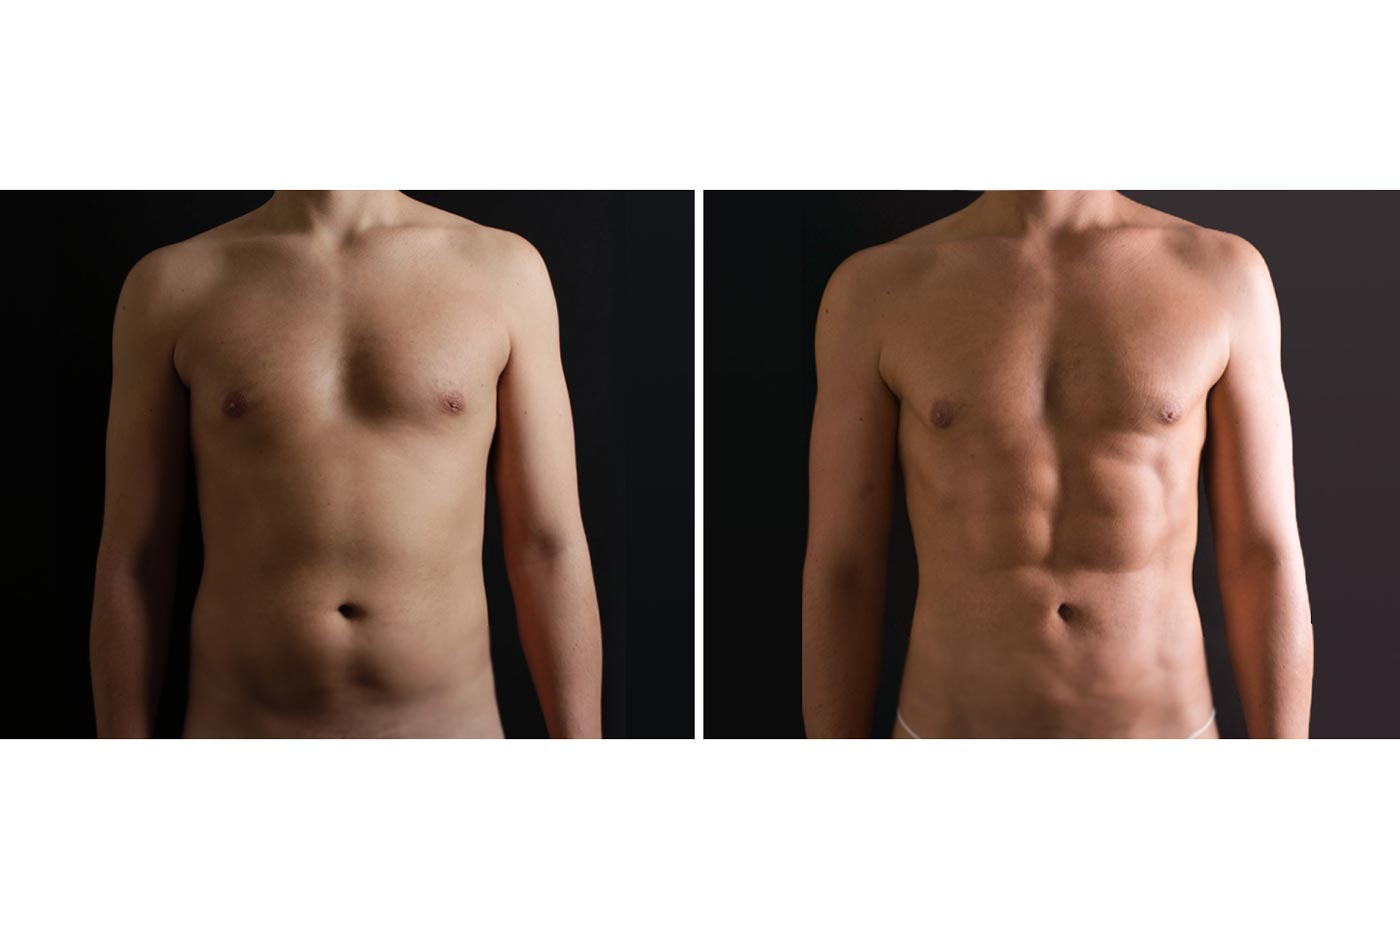 Male high definition liposuction before (left) and after (right), front view